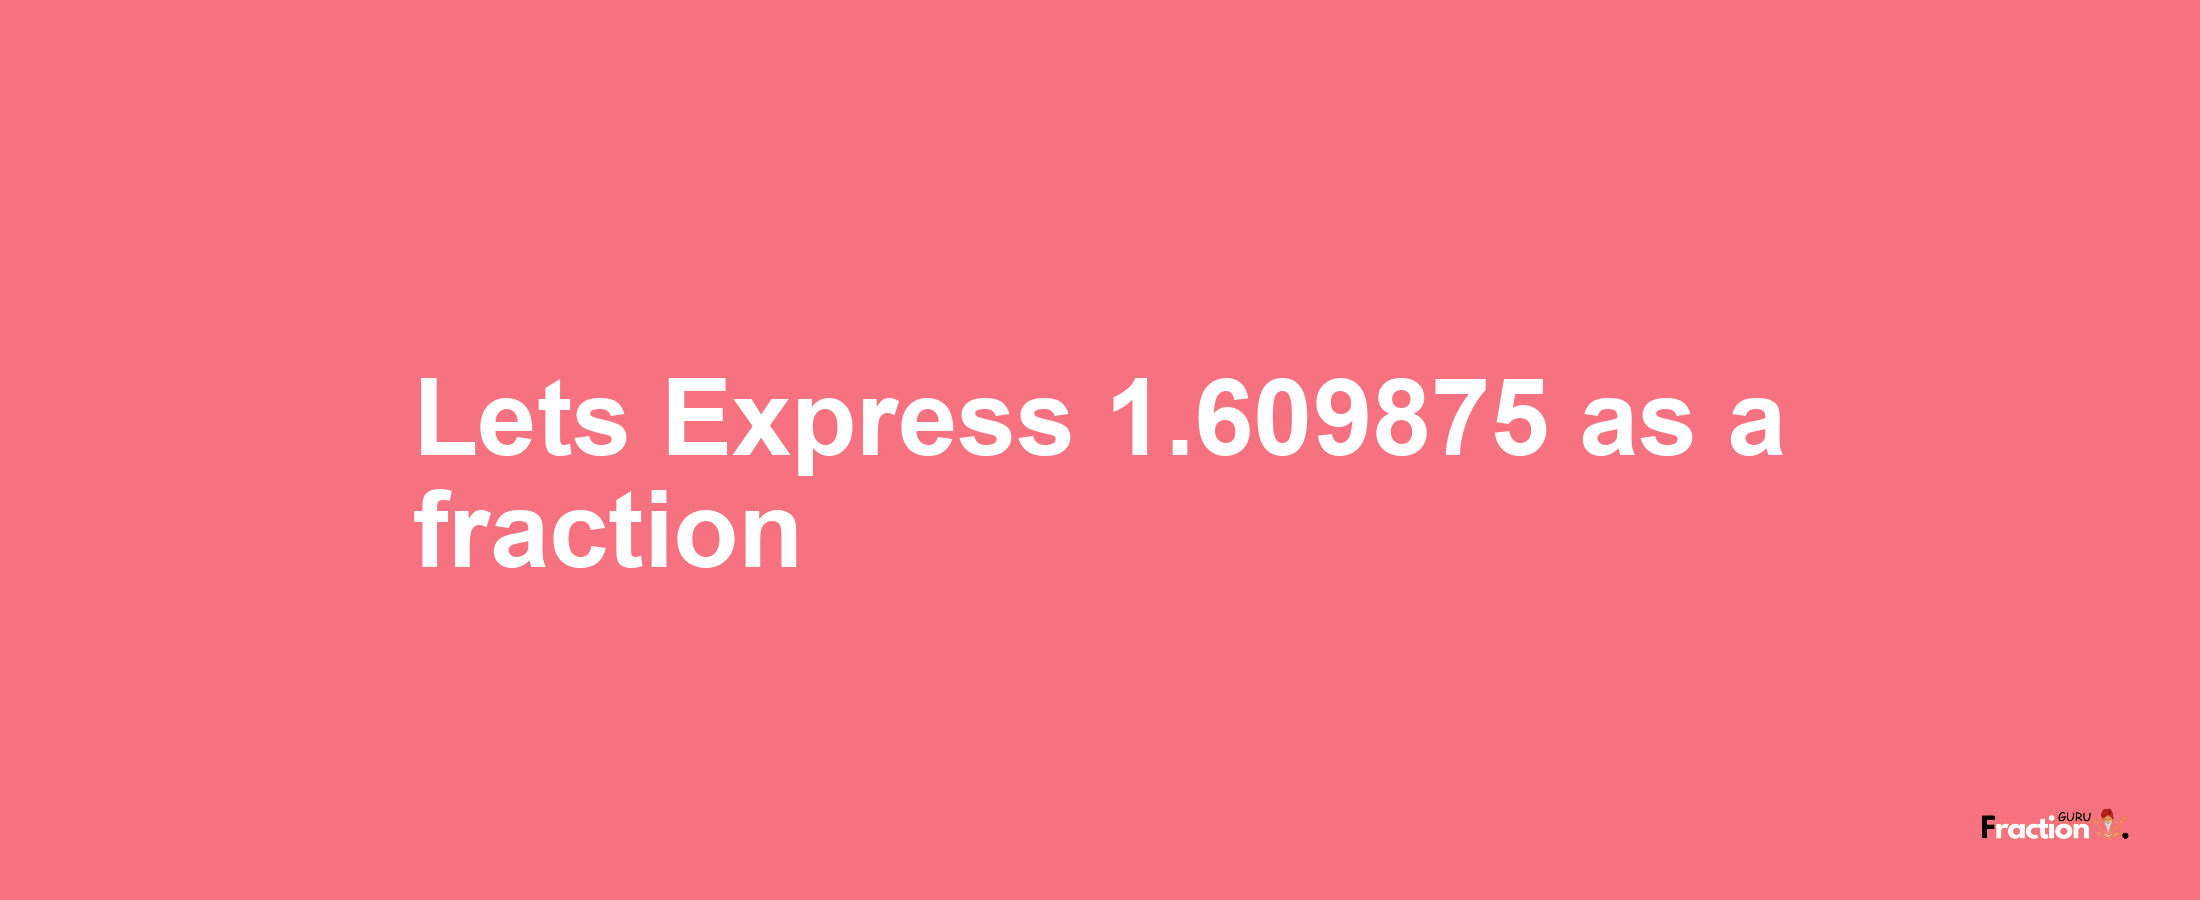 Lets Express 1.609875 as afraction